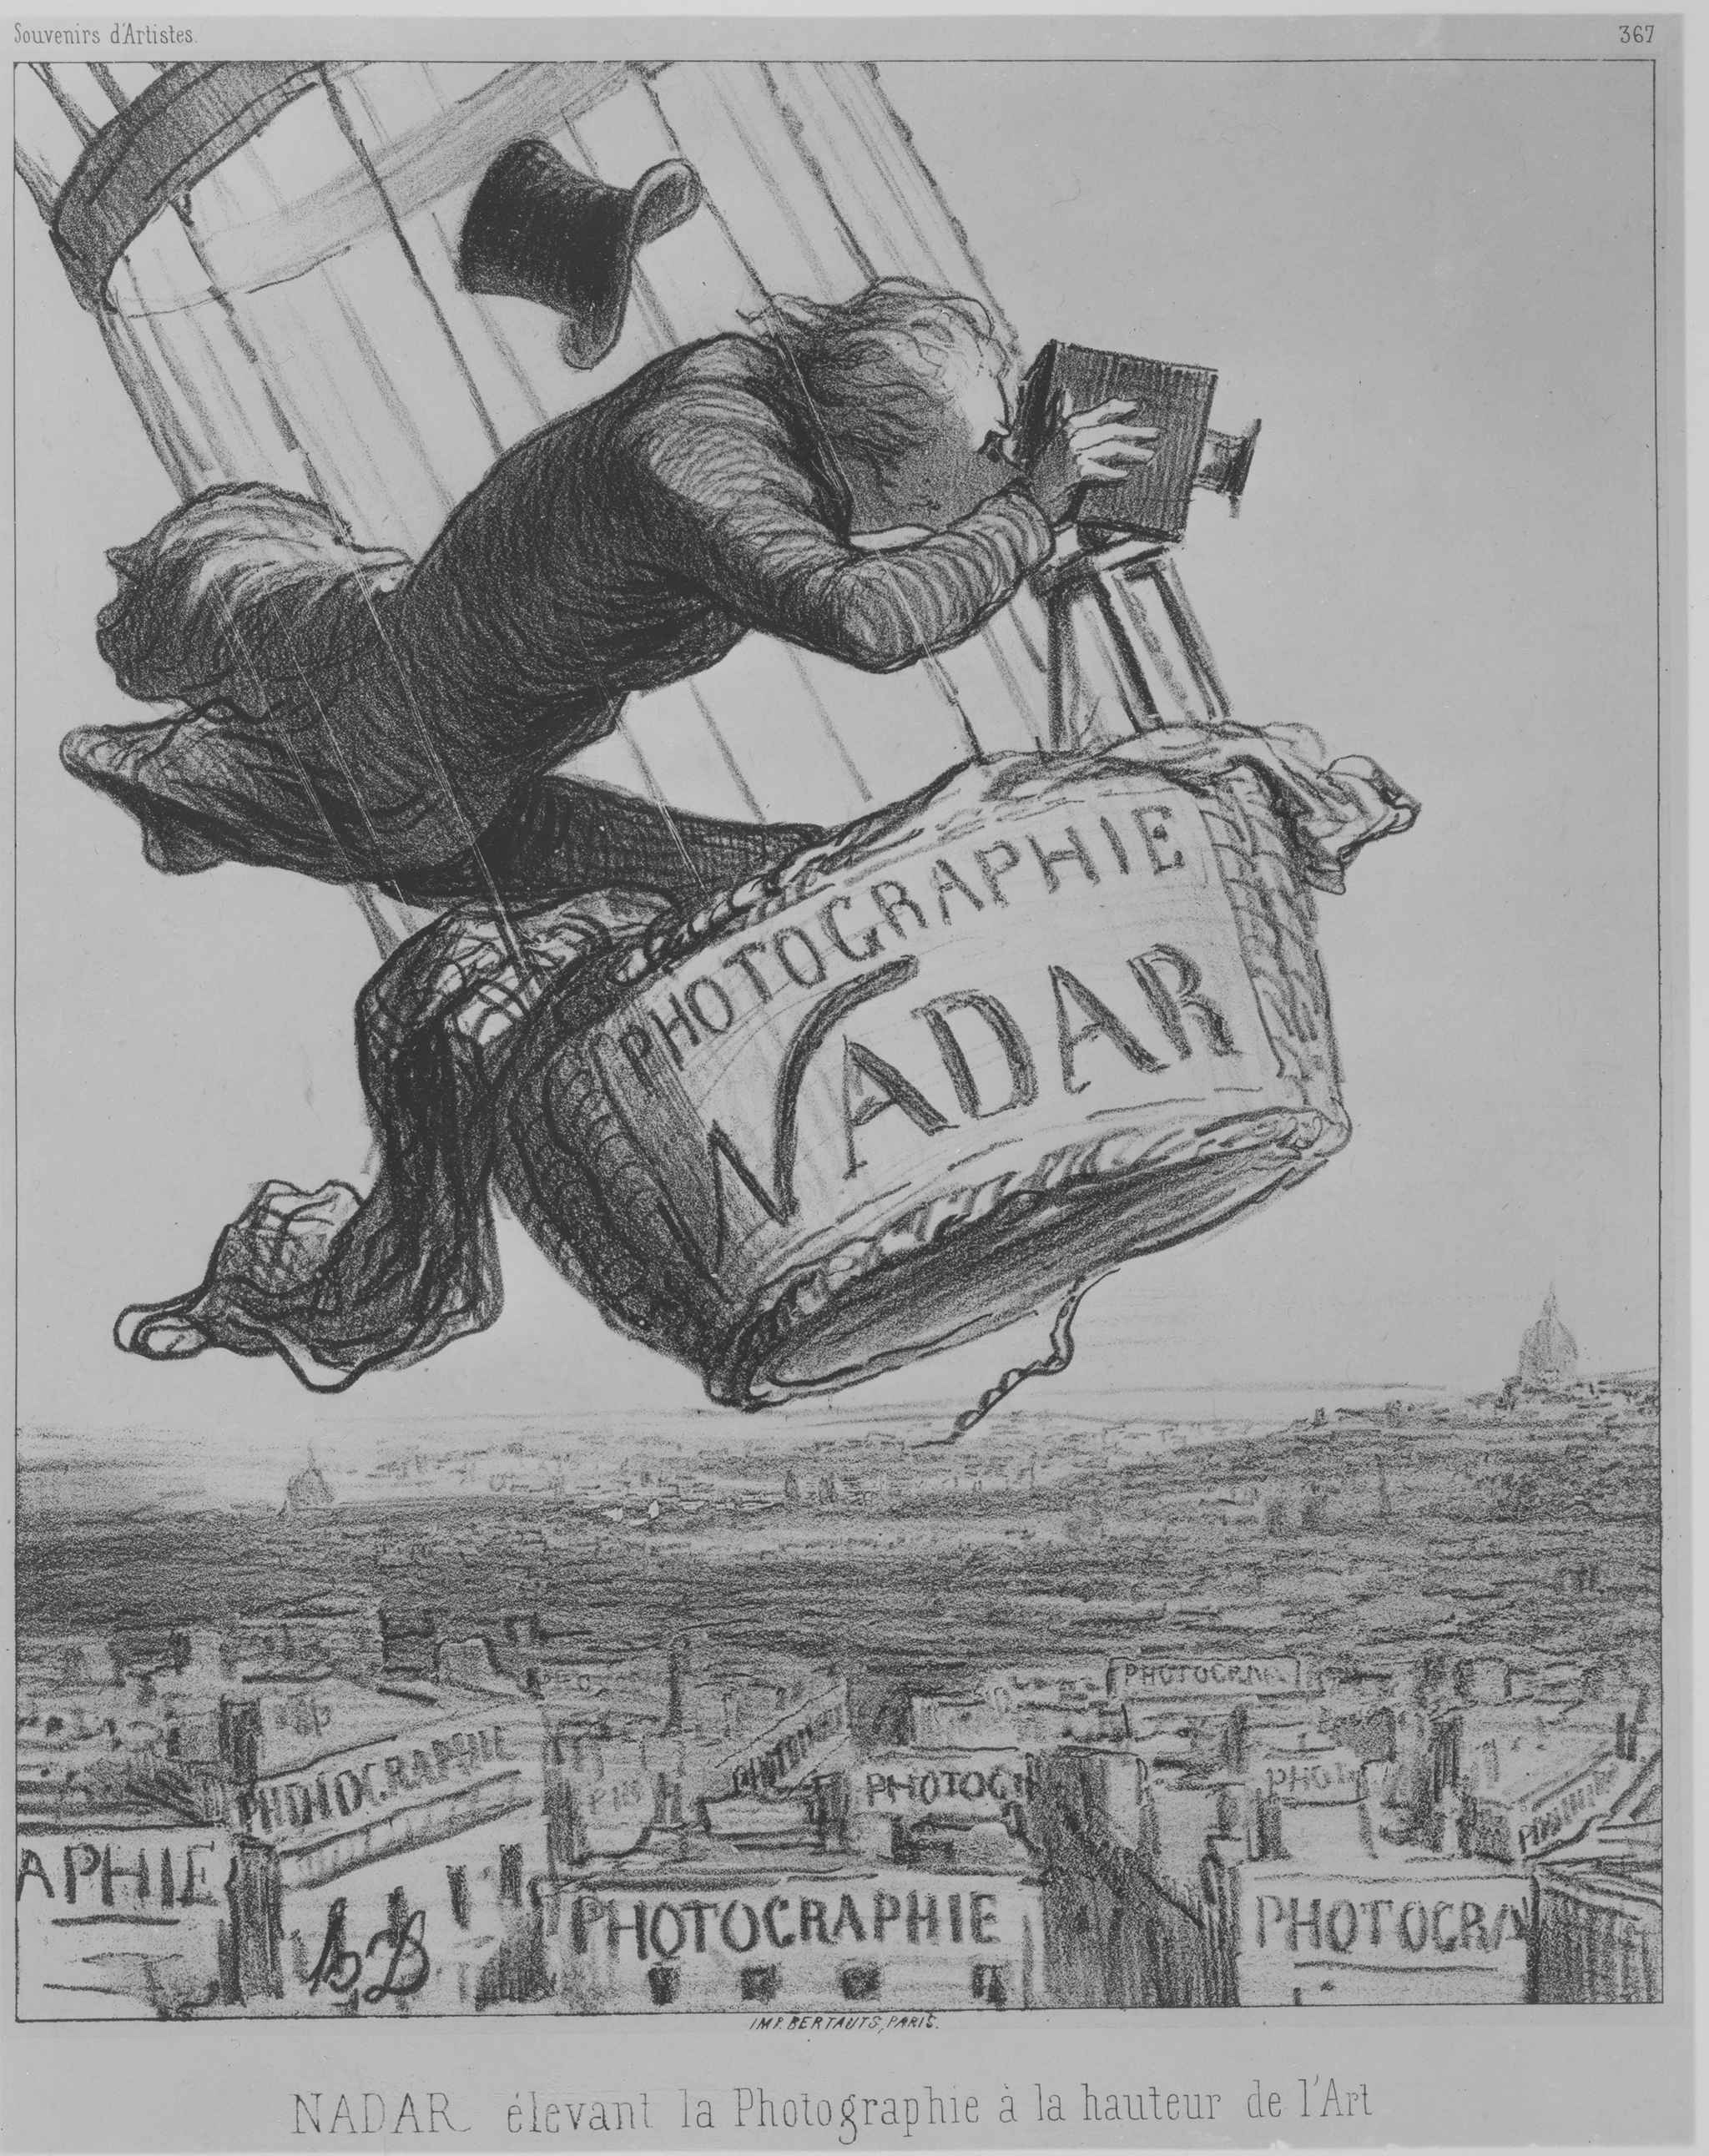 A sketch of man of riding along in the basket of a hot air balloon. He has his head pressed up against a camera and his top hat flying off above him. The basket has the words &ldquo;PHOTOGRAPHIE NADAR&rdquo; written on it. The basket is high above the buildings and landmarks below.